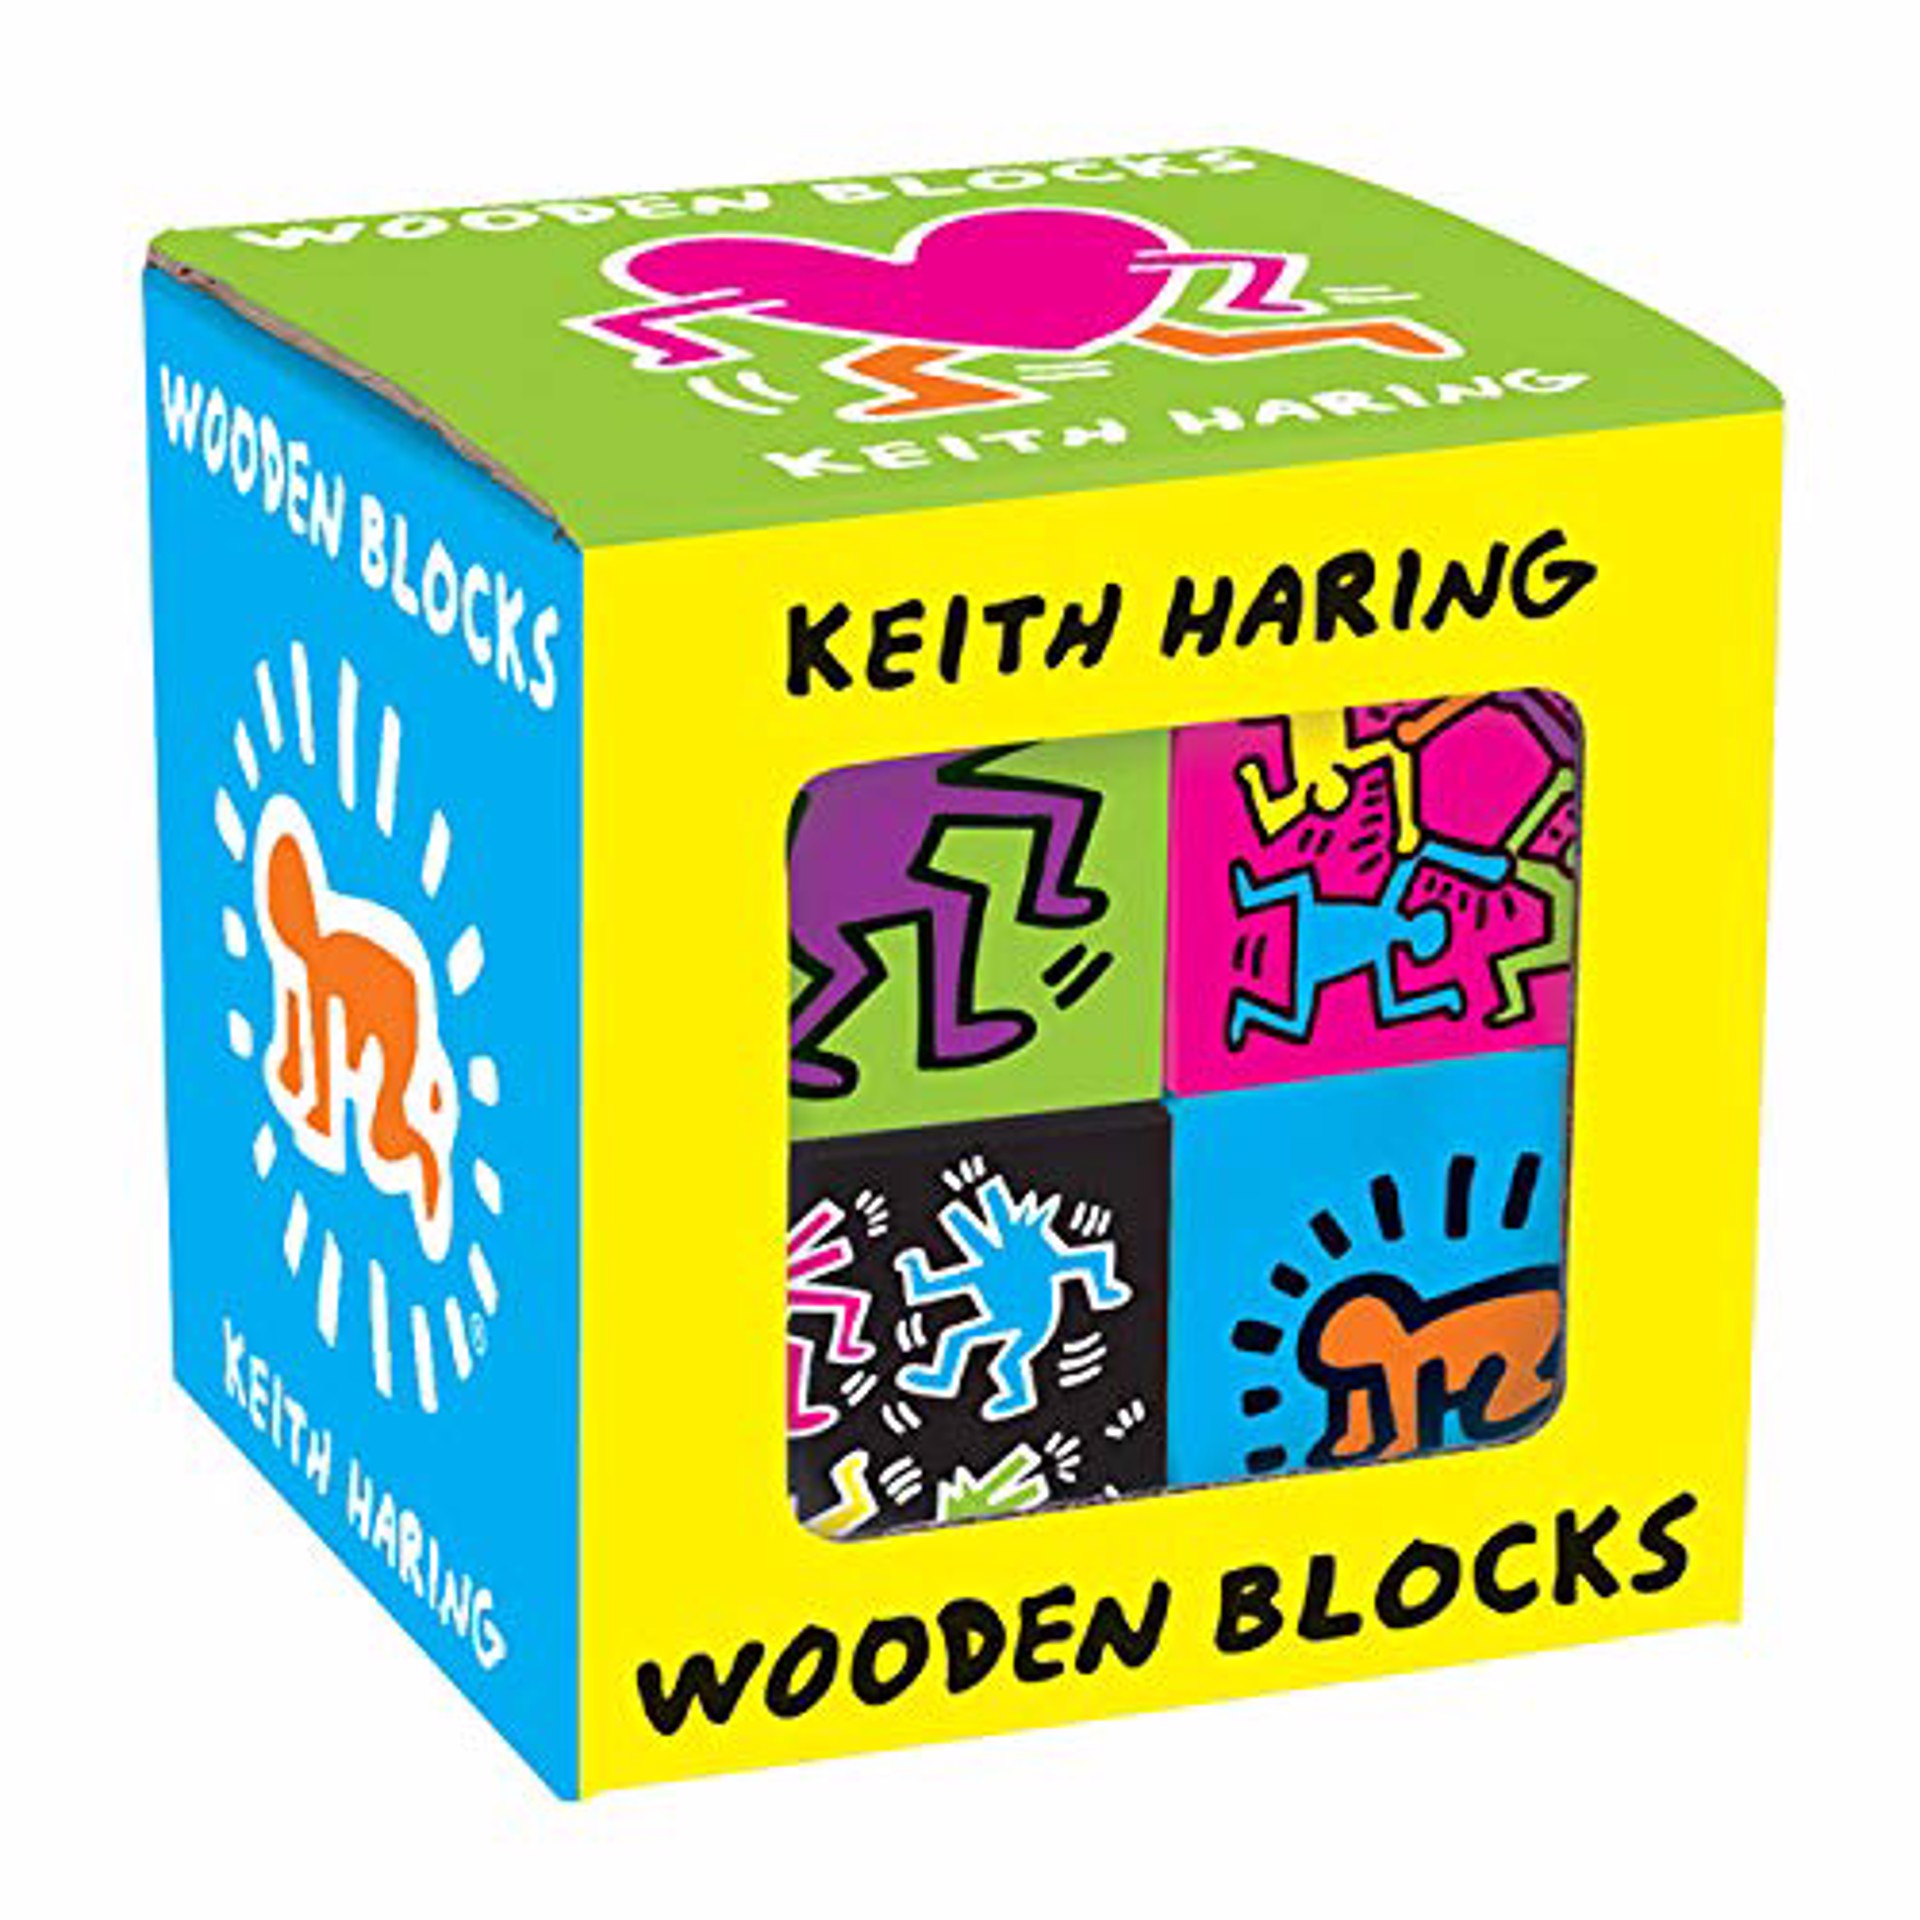 Wooden Blocks by Keith Haring